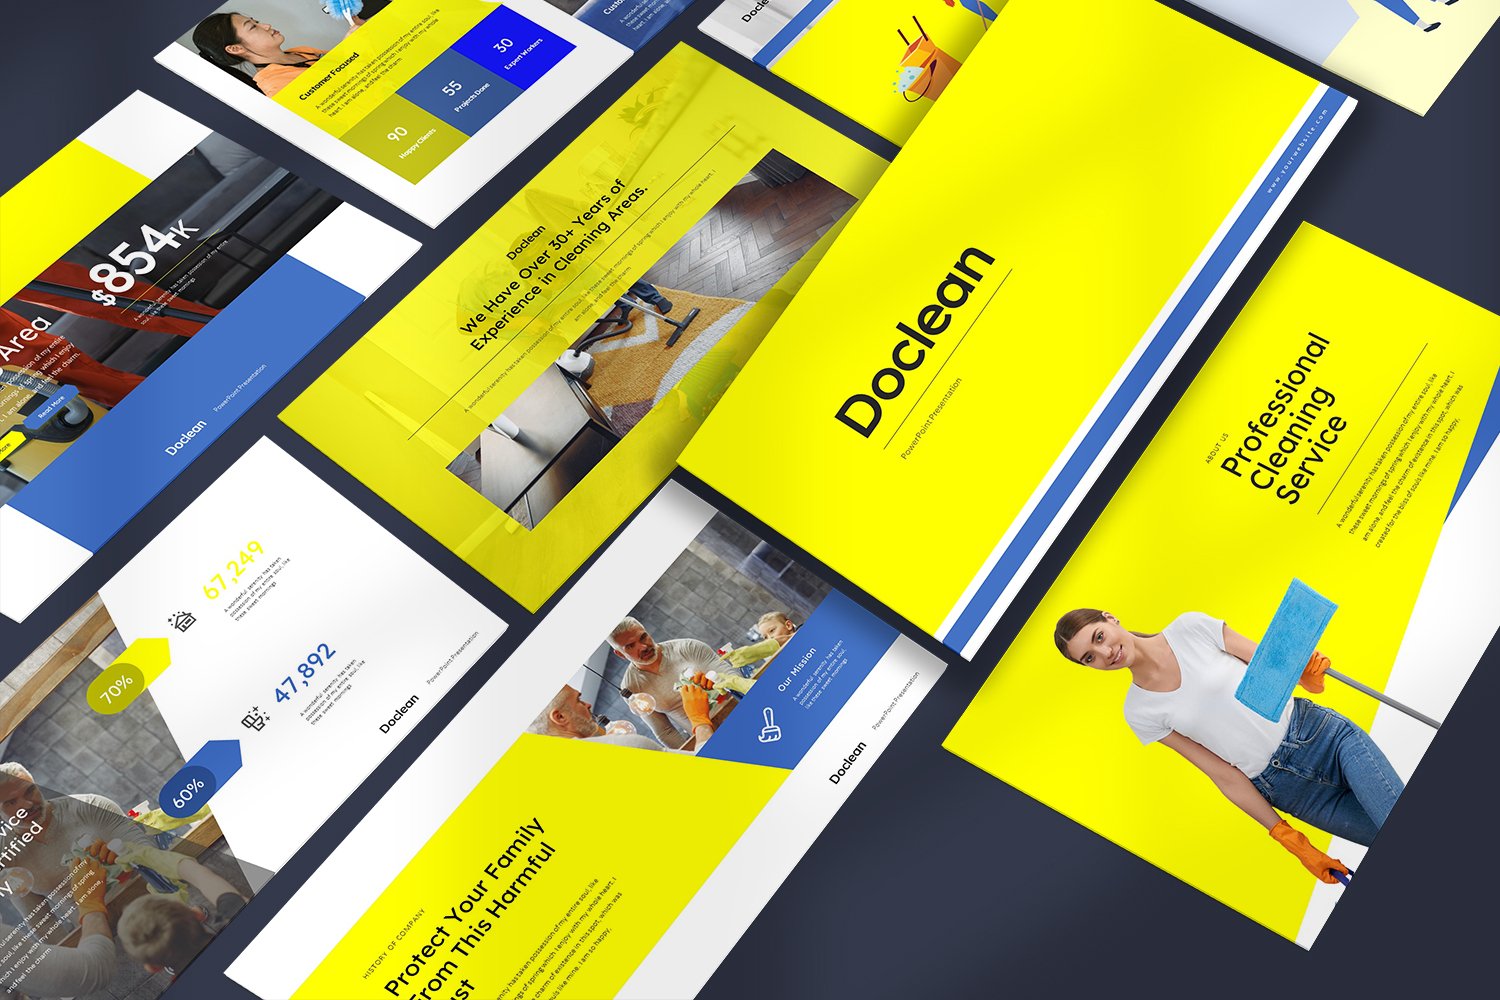 Doclean Powerpoint Presentation cover image.